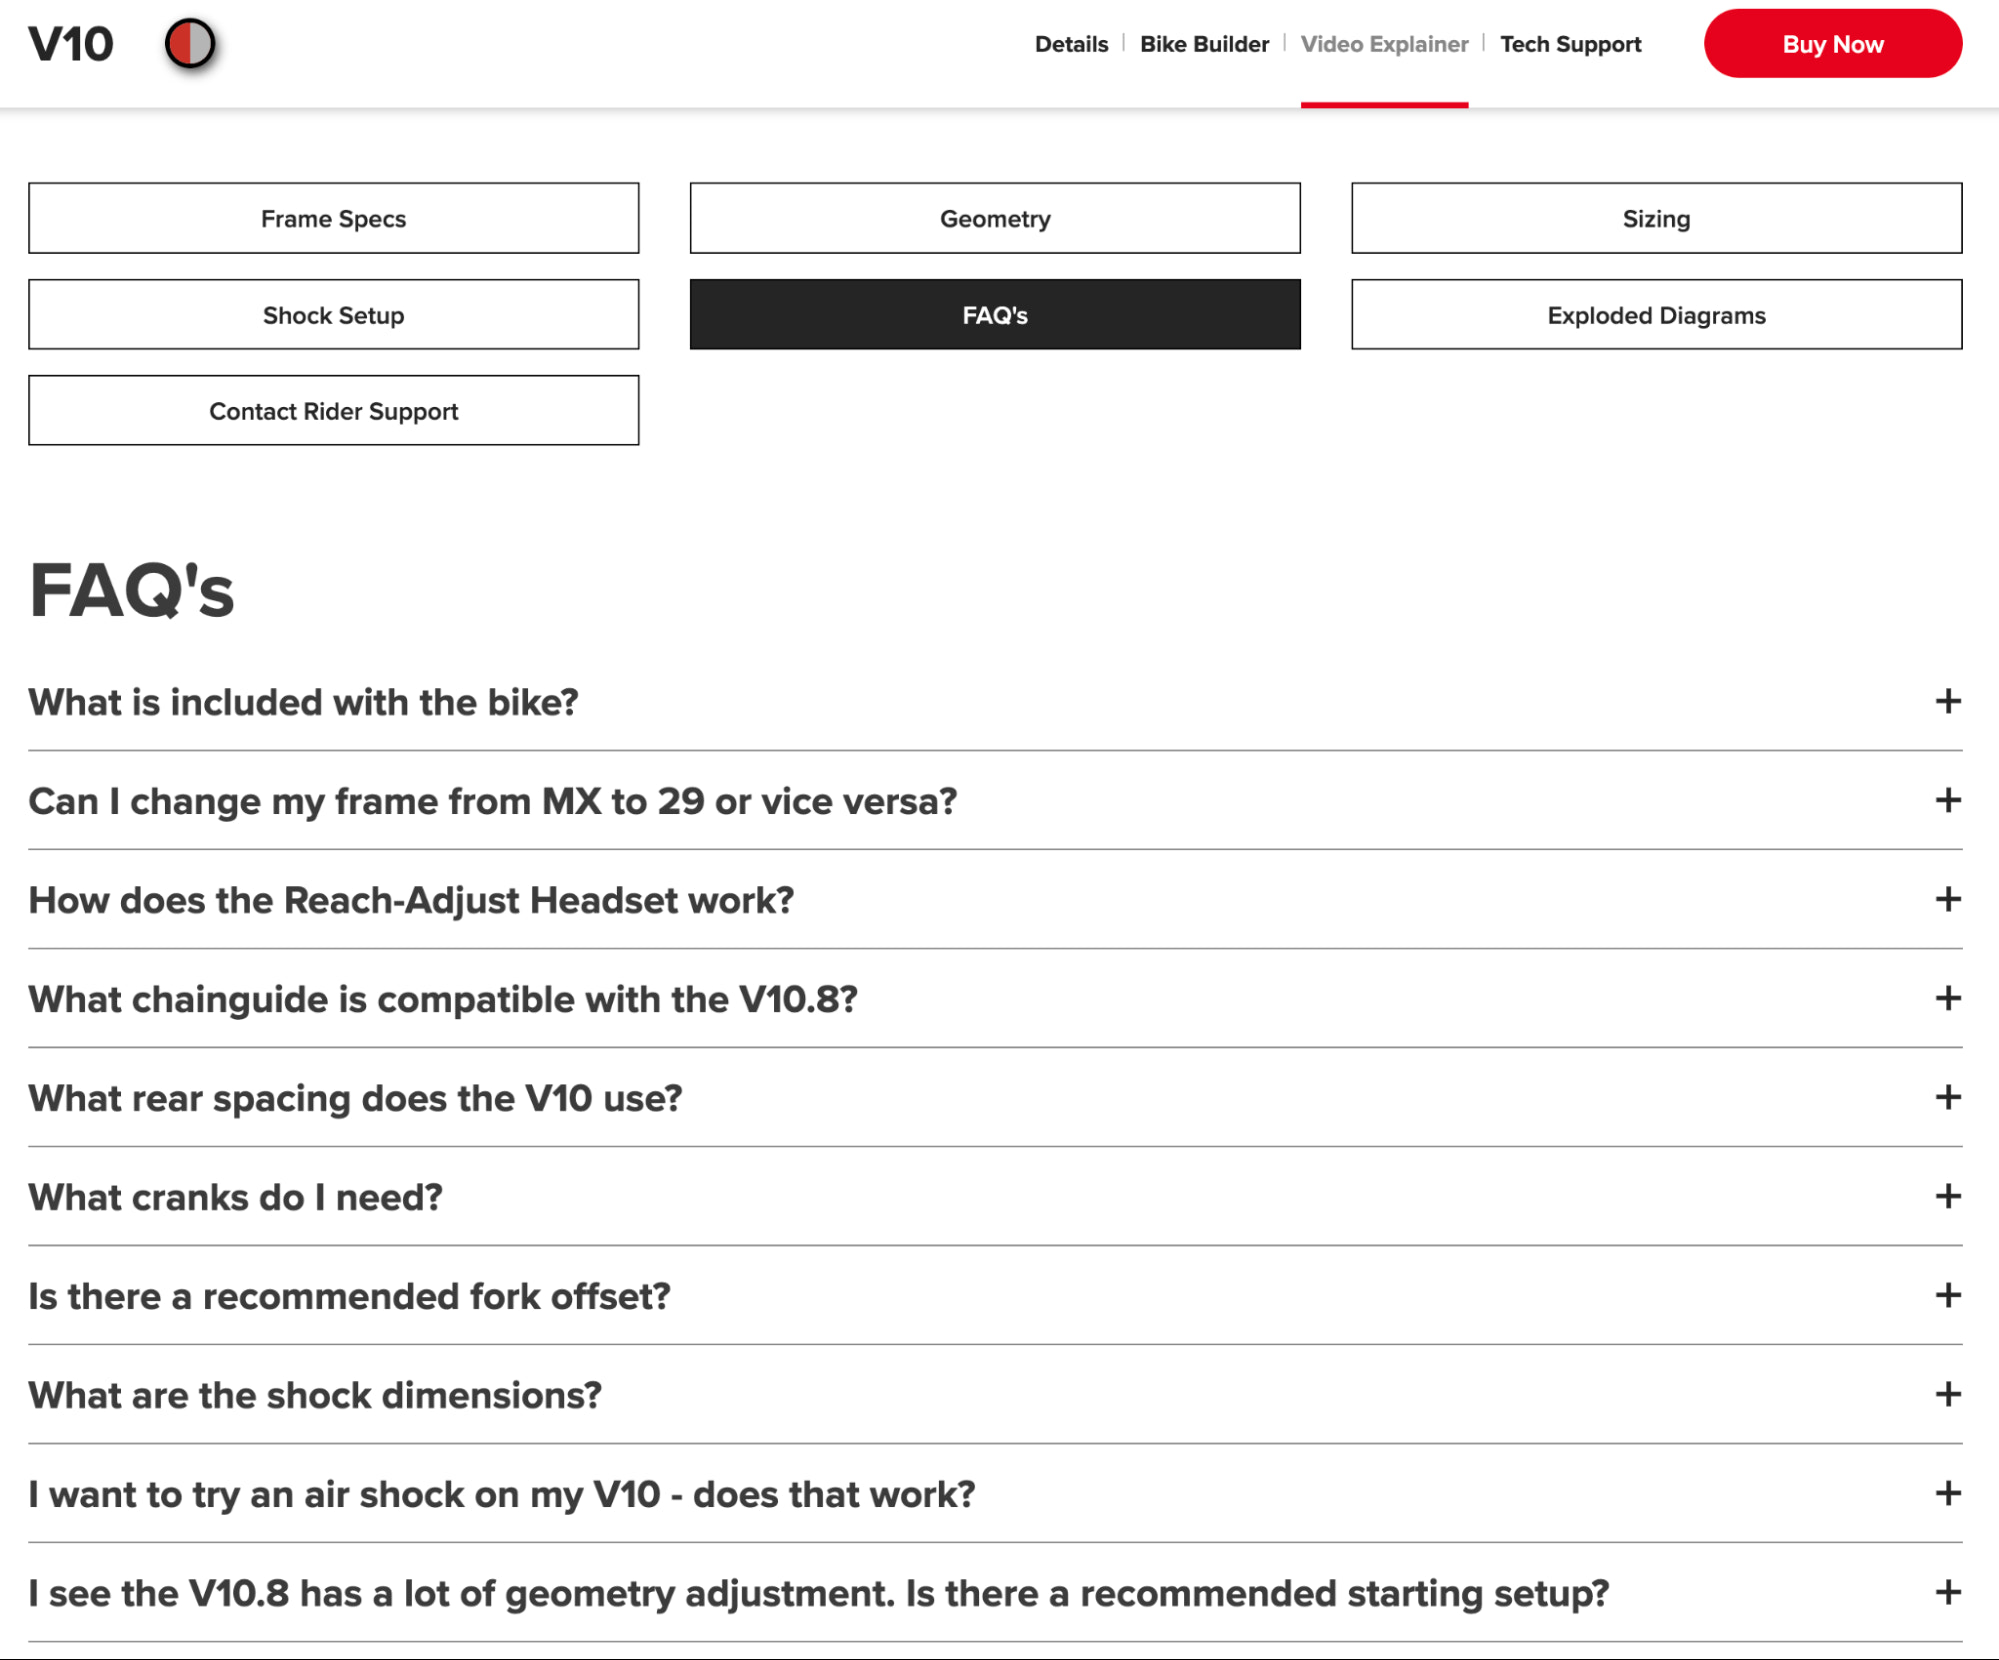 FAQ section on the V10 Tech Support product page for Santa Cruz Bicycles